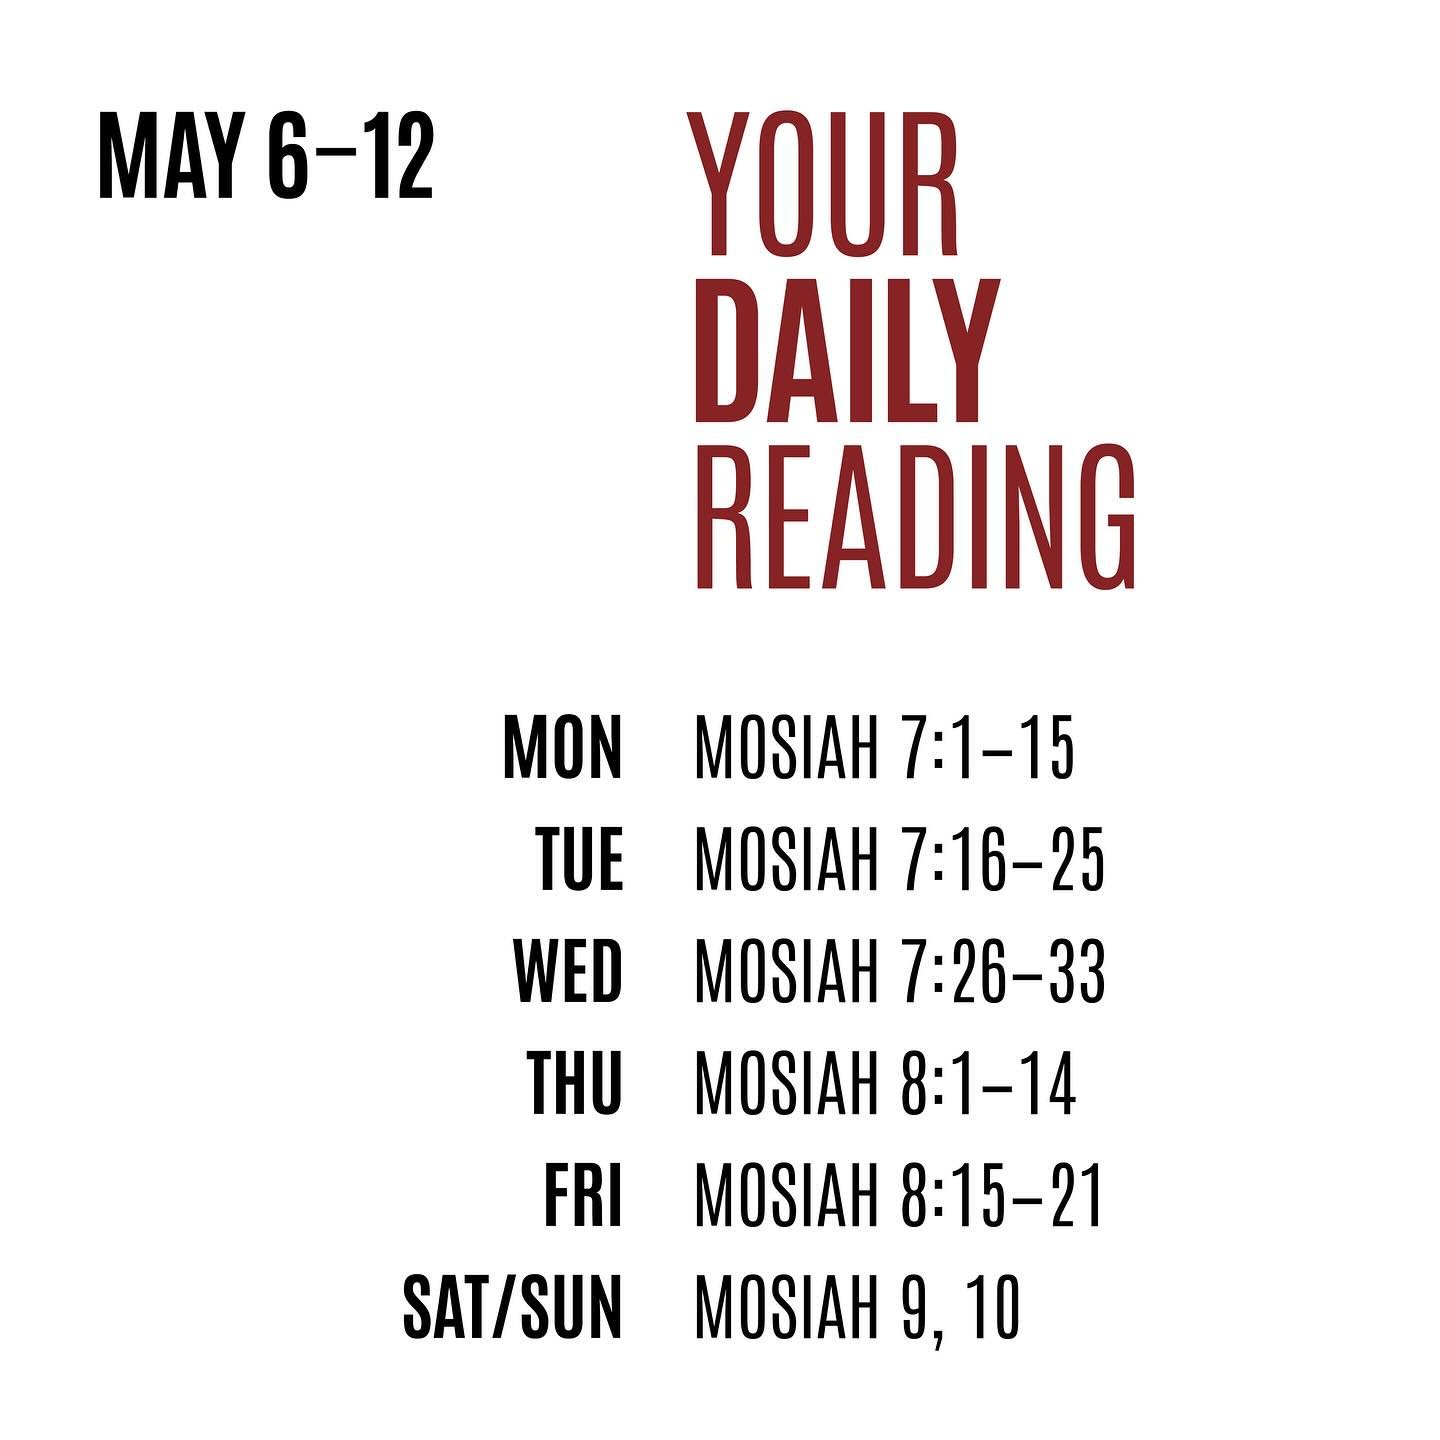 This week in Come, Follow Me we will be studying Mosiah 7-10 in the Book of Mormon.

 
Here are the segments you can look forward to:

SEGMENT ONE: THE PRICE OF RESCUE

SEGMENT TWO: THAT SAME GOD

SEGMENT THREE: HIS WILL AND PLEASURE

SEGMENT FOUR: D